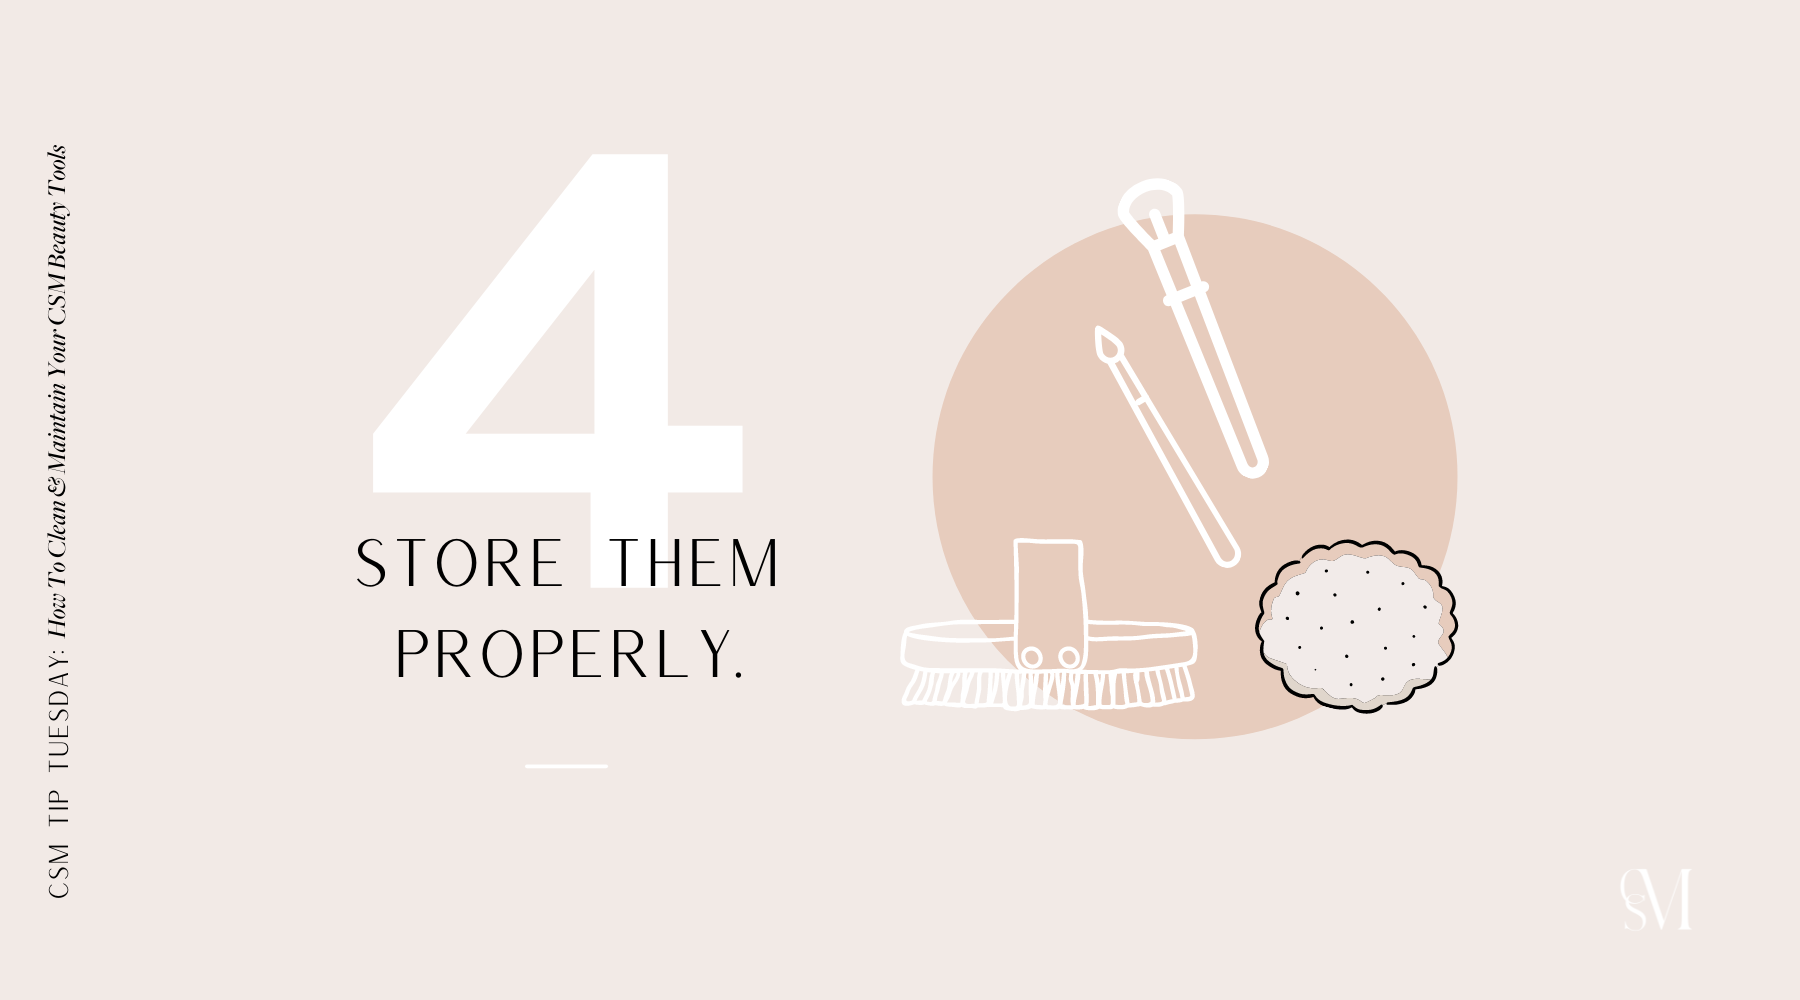 Store your beauty tools properly. 